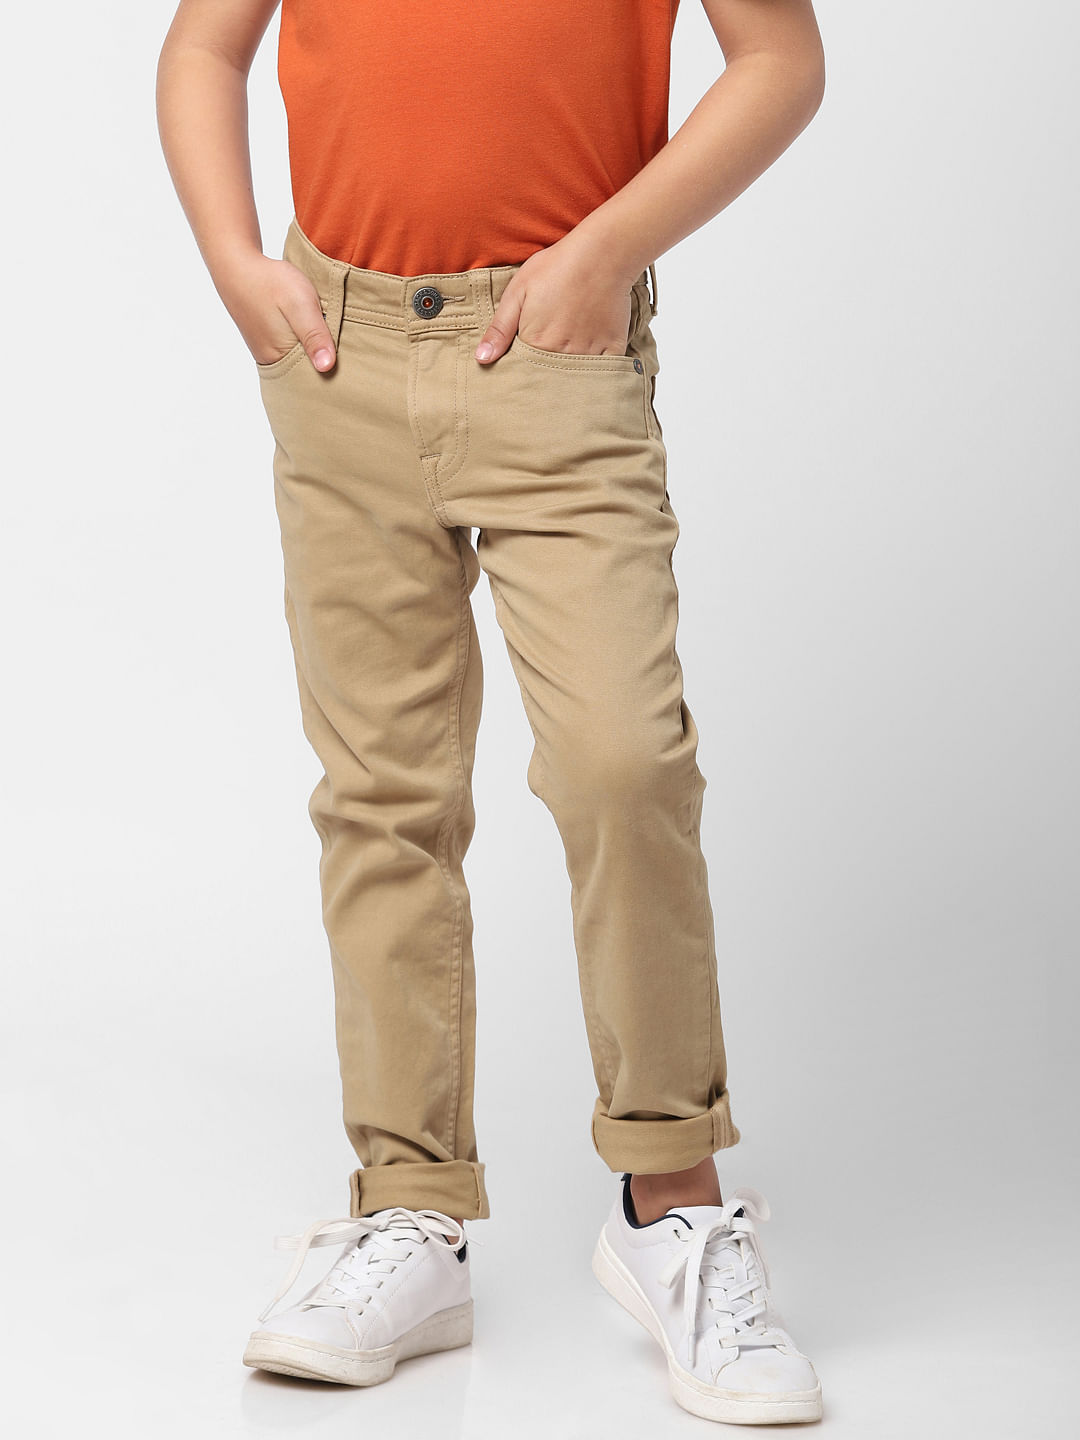 Source Latest hot boys trousers new pants Korean casual men fashion jeans  on m.alibaba.com